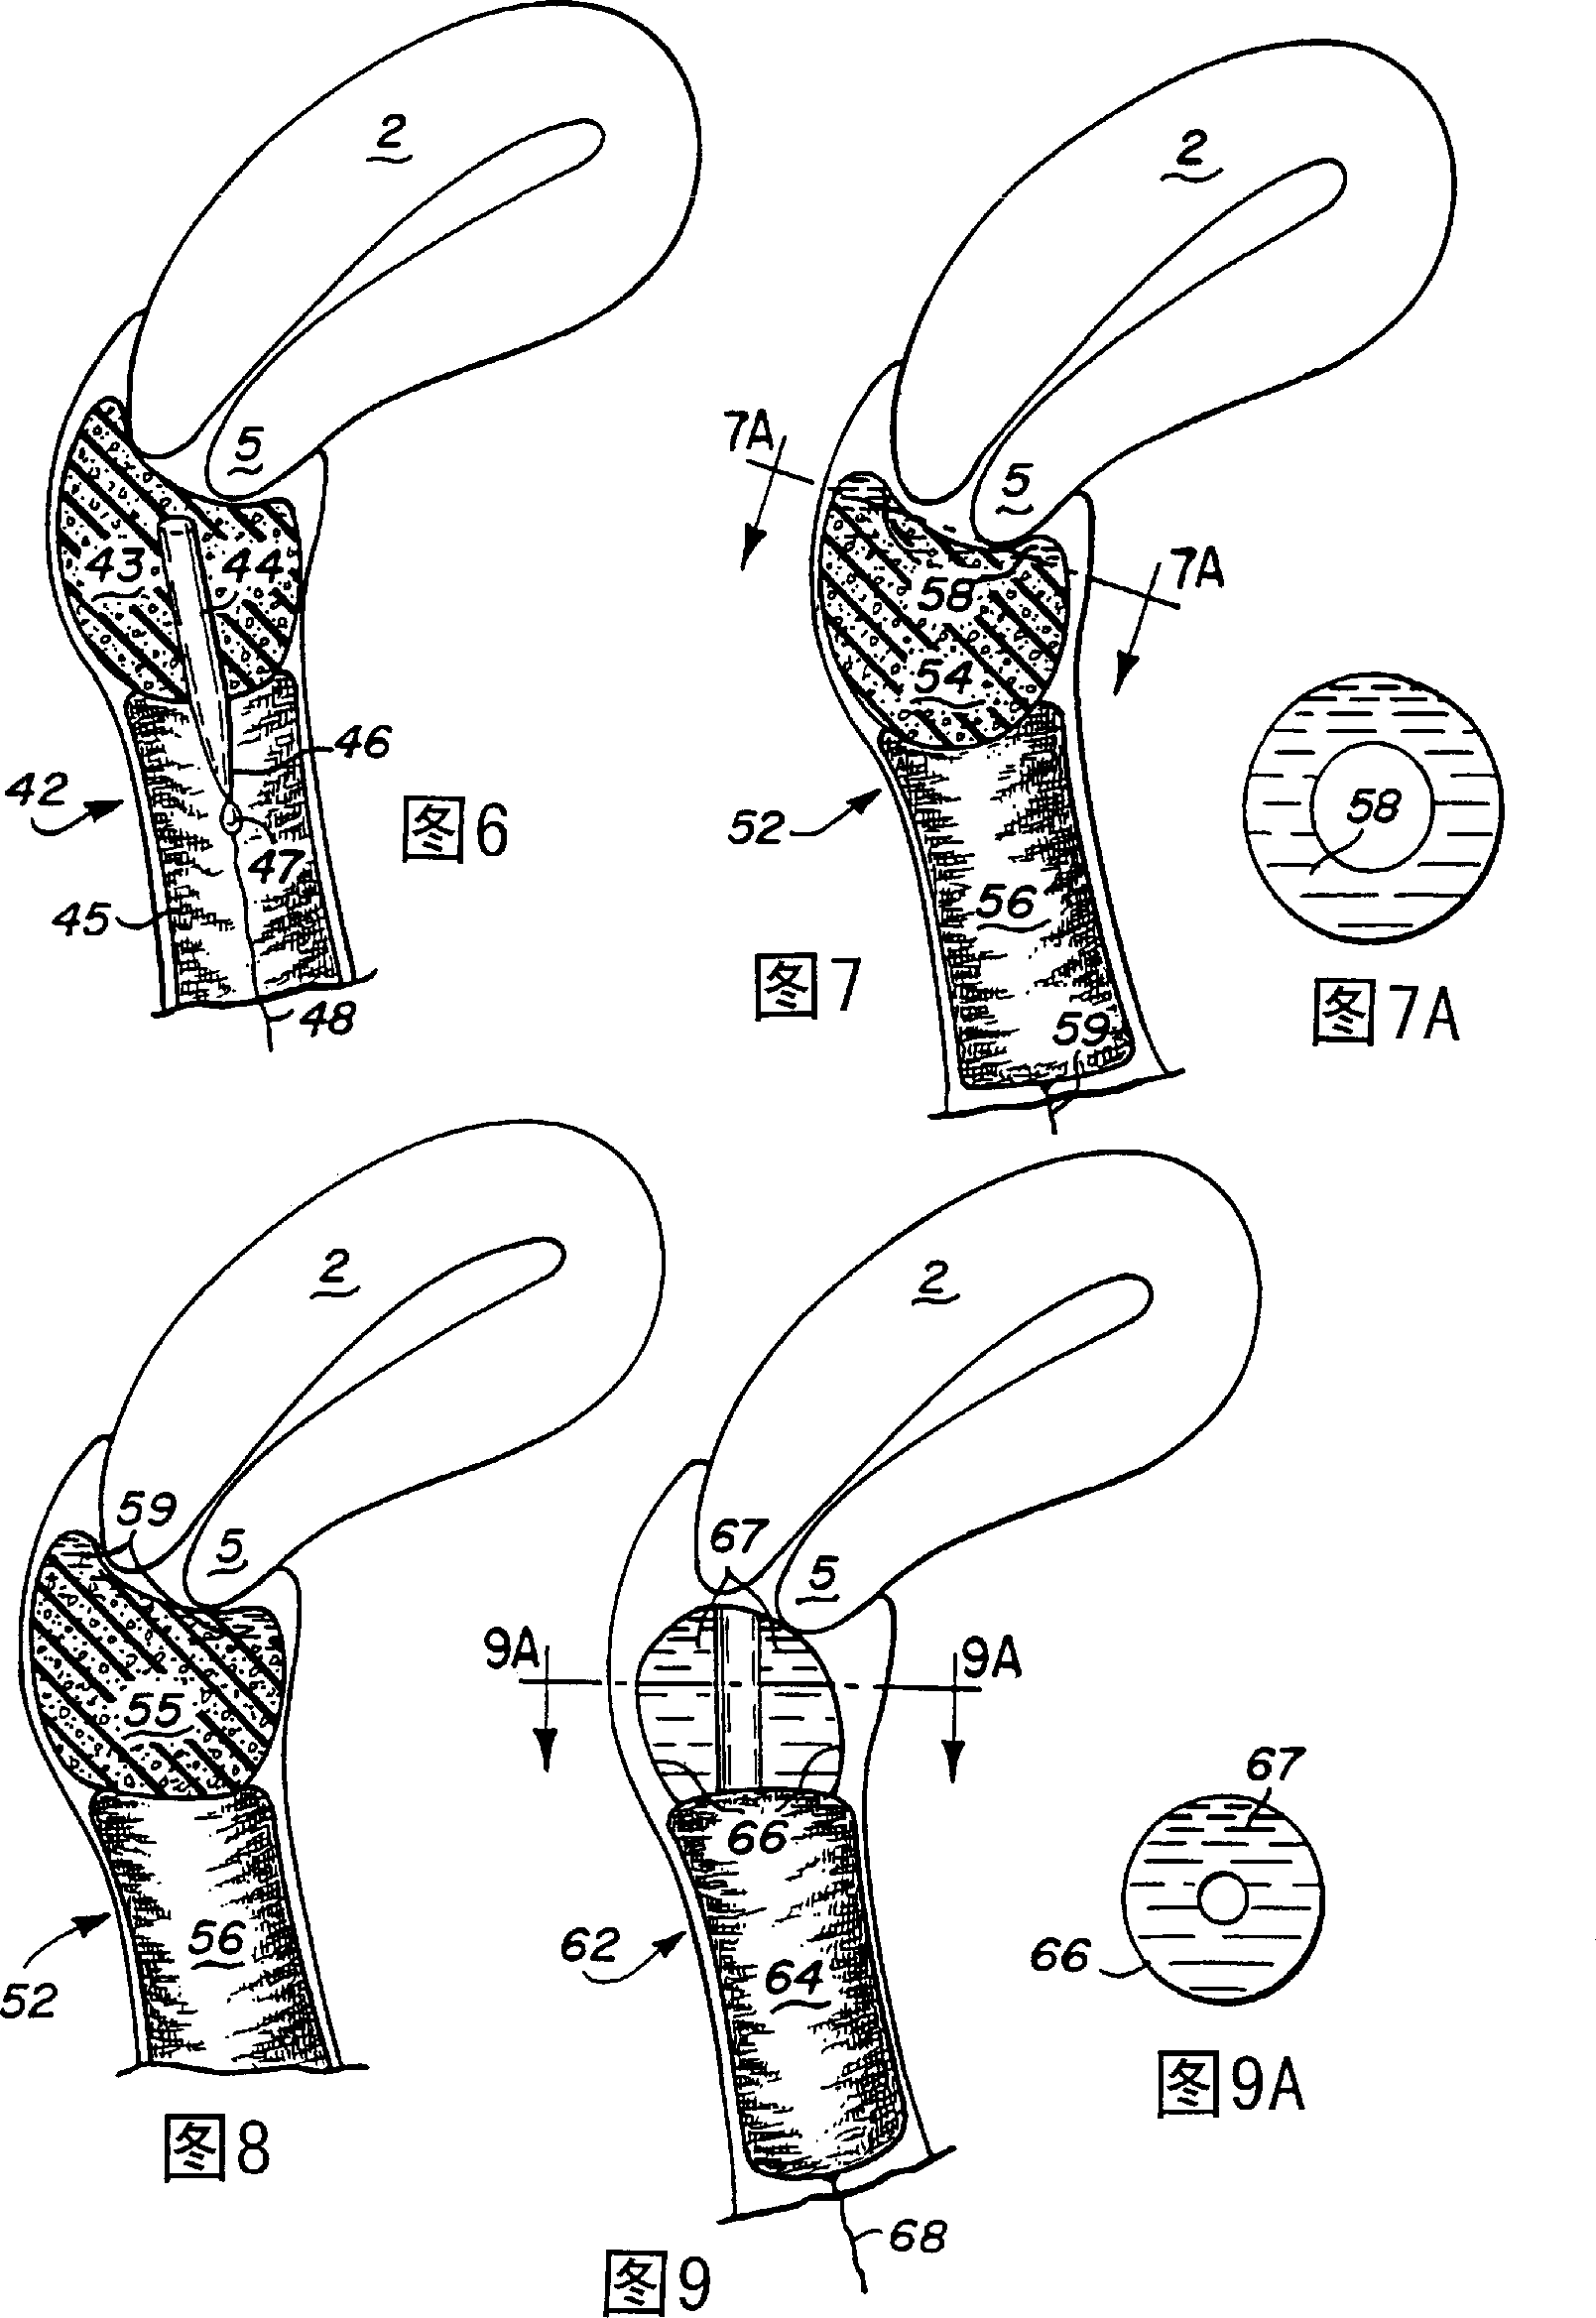 Device and method for treatment of dysmenorrhea